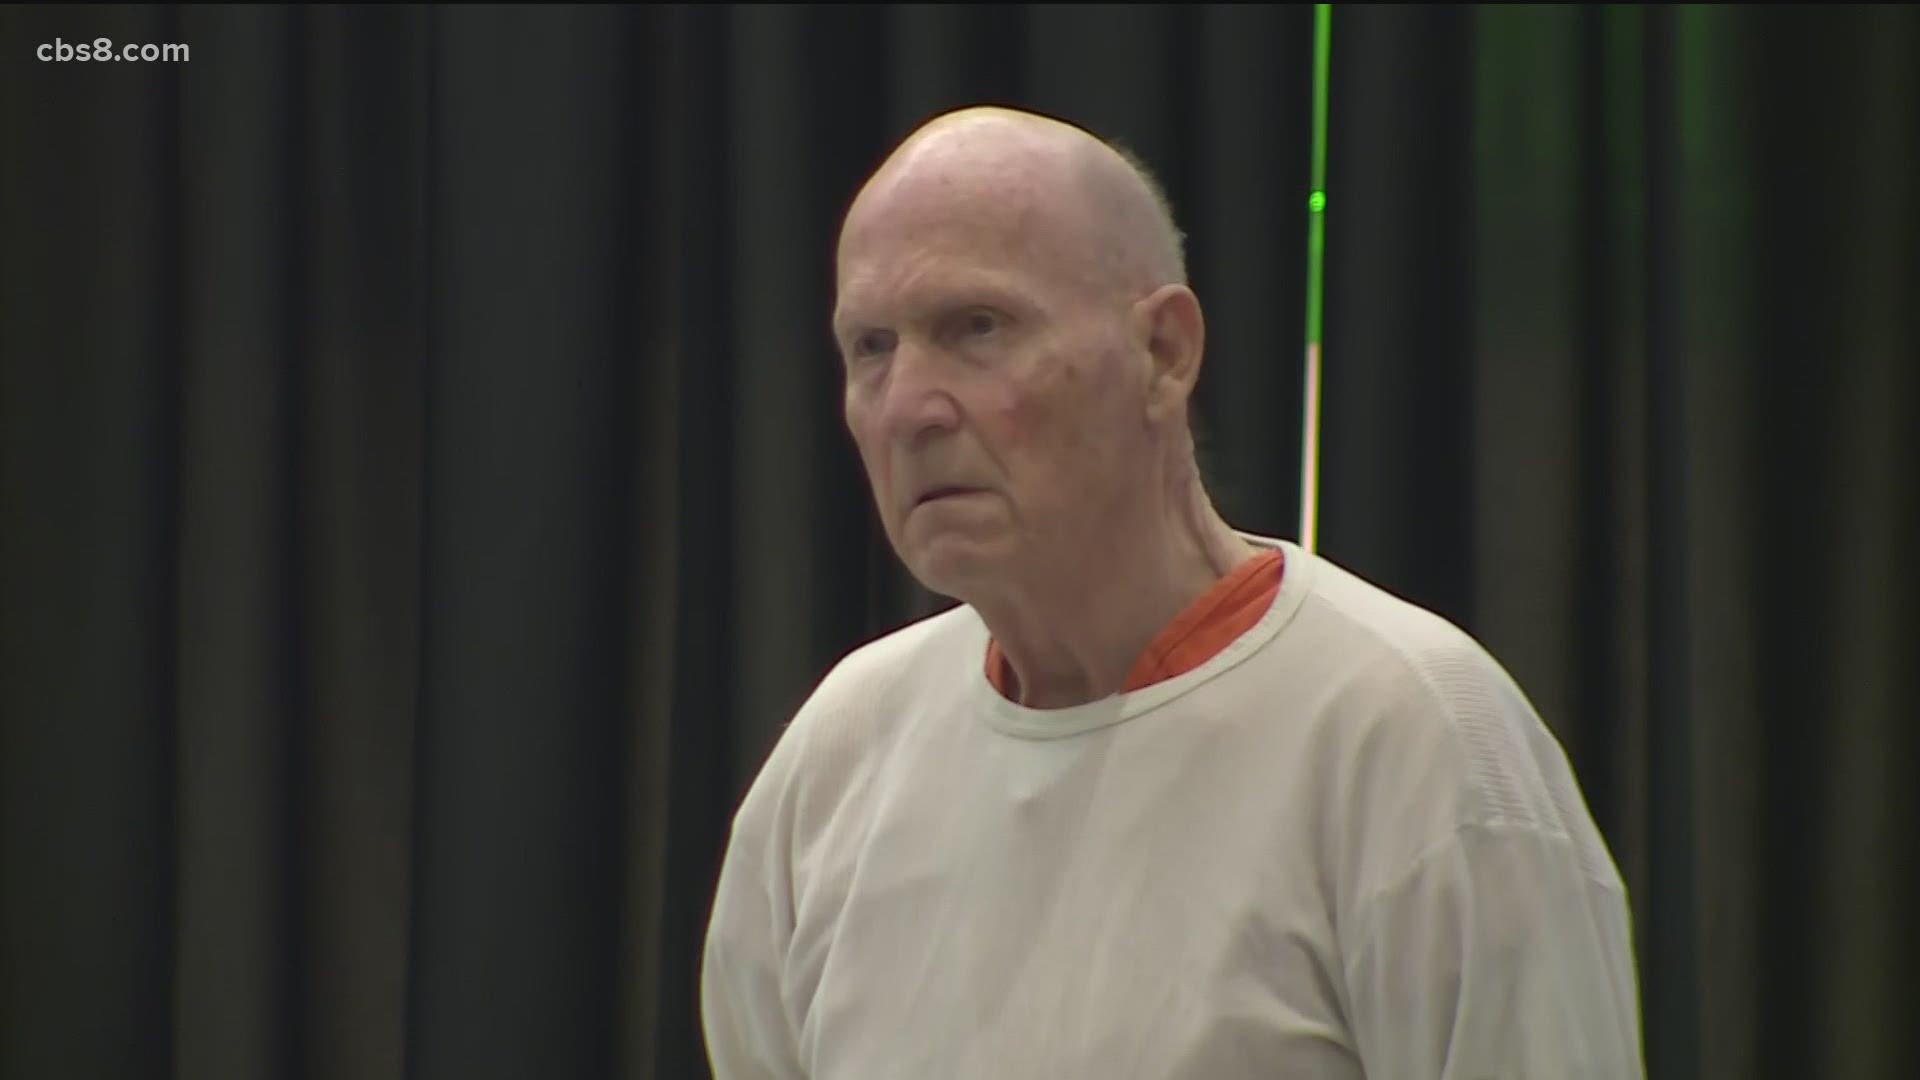 Joseph DeAngelo admitted his guilt June 29 to a string of murders, rapes and other crimes in the 1970s and 1980s, stretching from Sacramento County to Orange County.